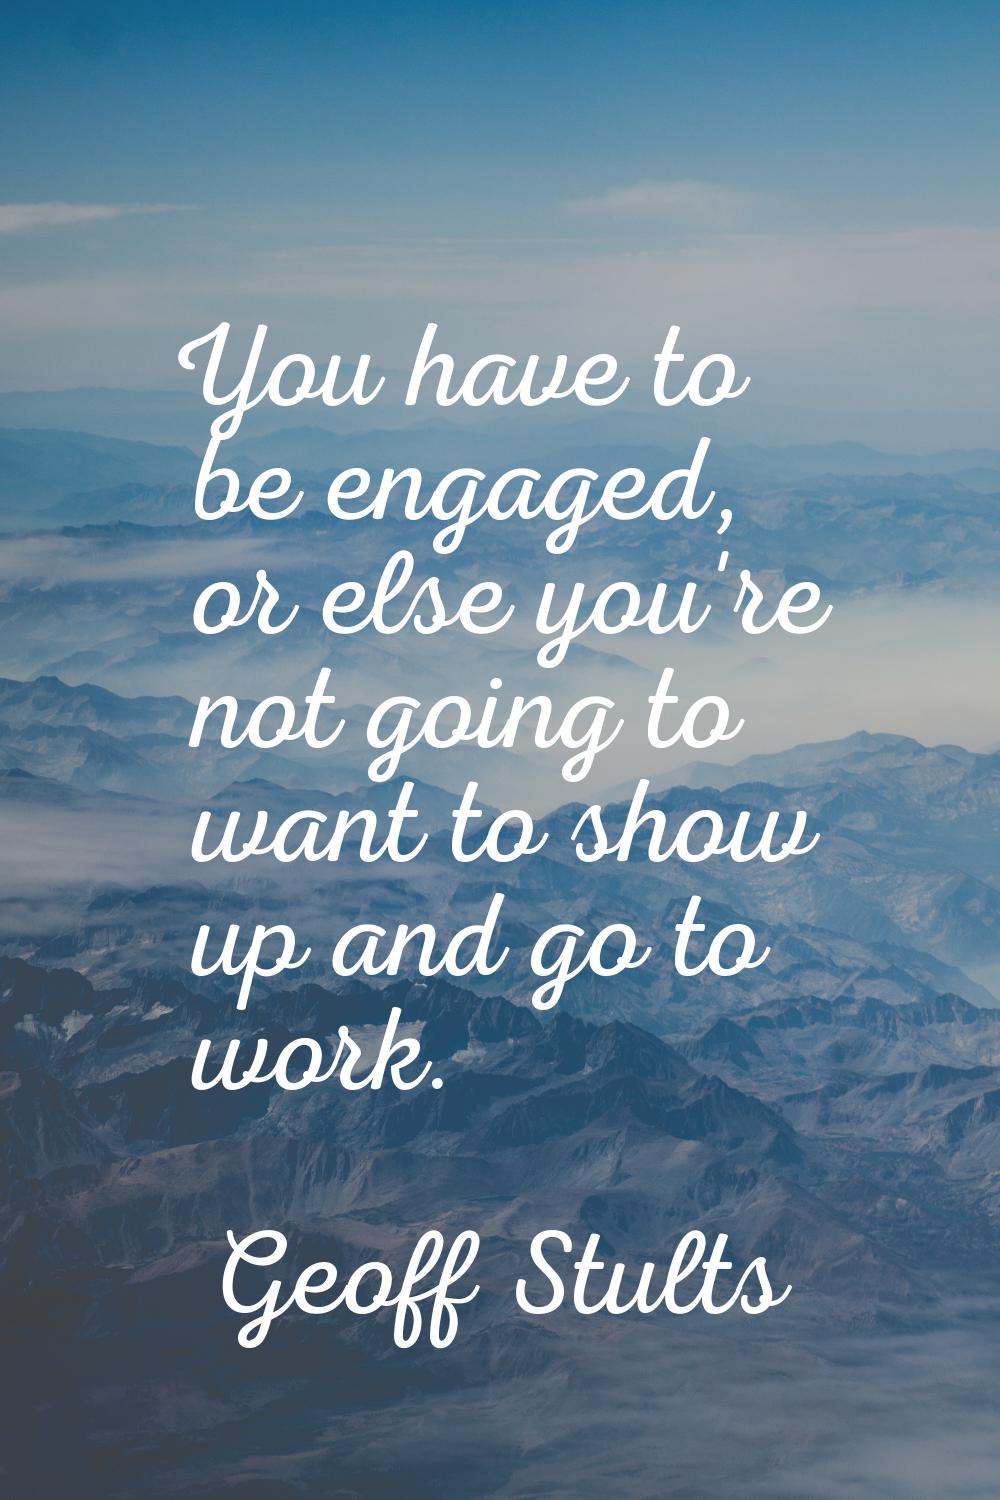 You have to be engaged, or else you're not going to want to show up and go to work.